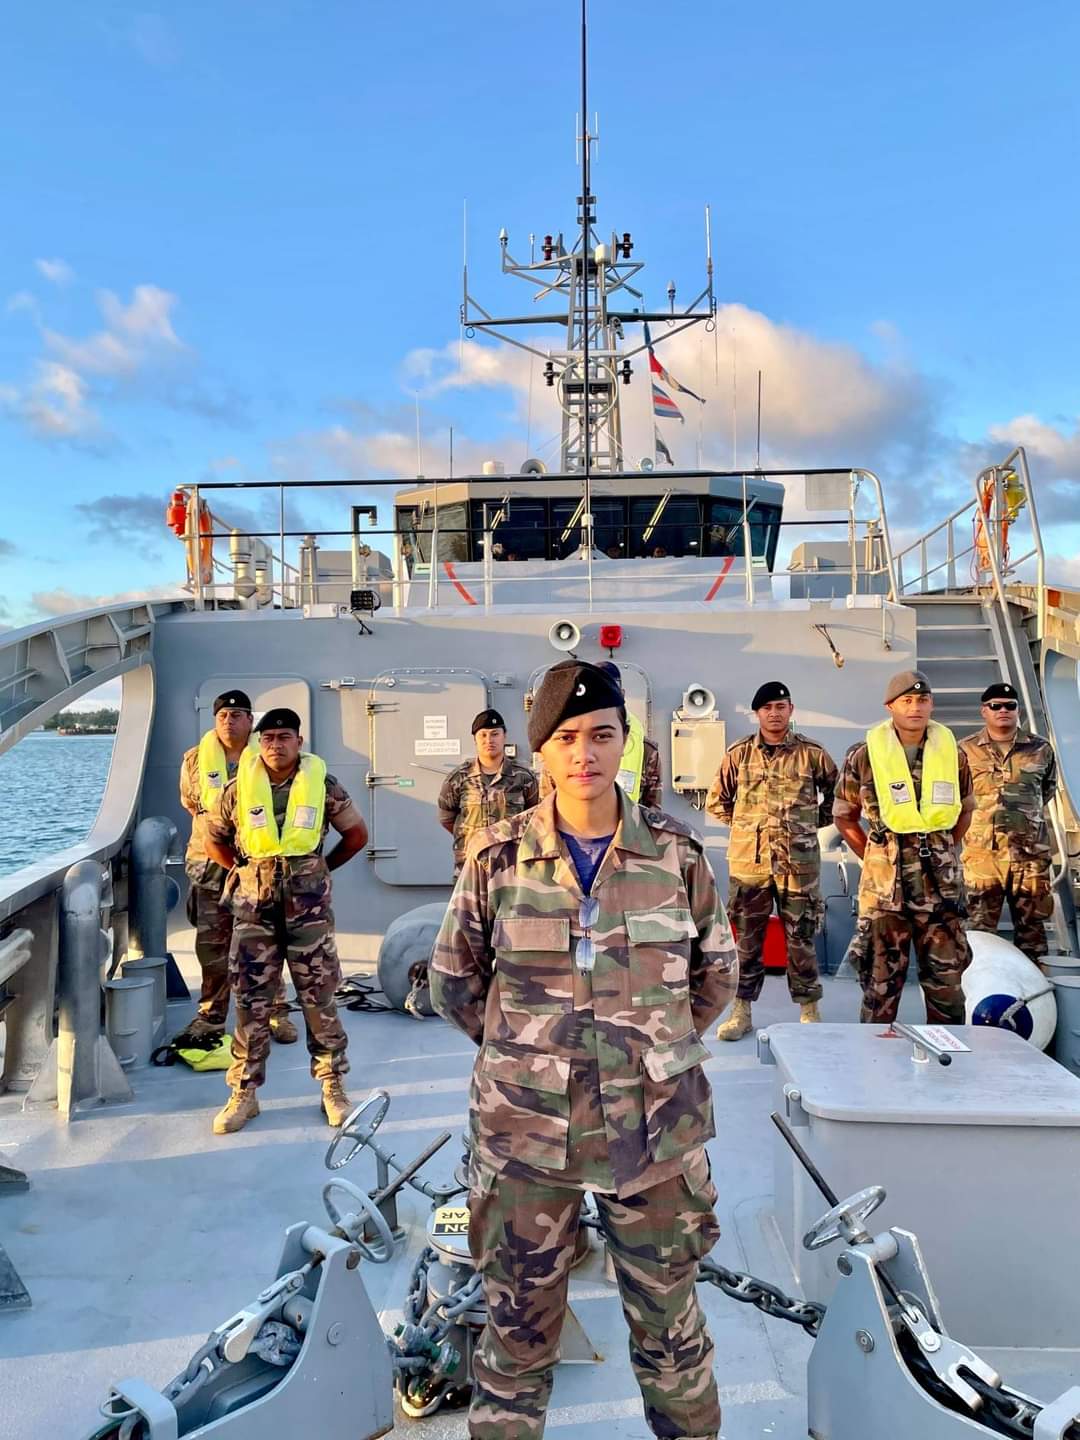 Frederica on X: His Majesty's Armed Forces made history w/ the 1st female  sailors @ sea during an operation. On VOEA Ngahau Koula & in company w/  VOEA Ngahau Siliva the women